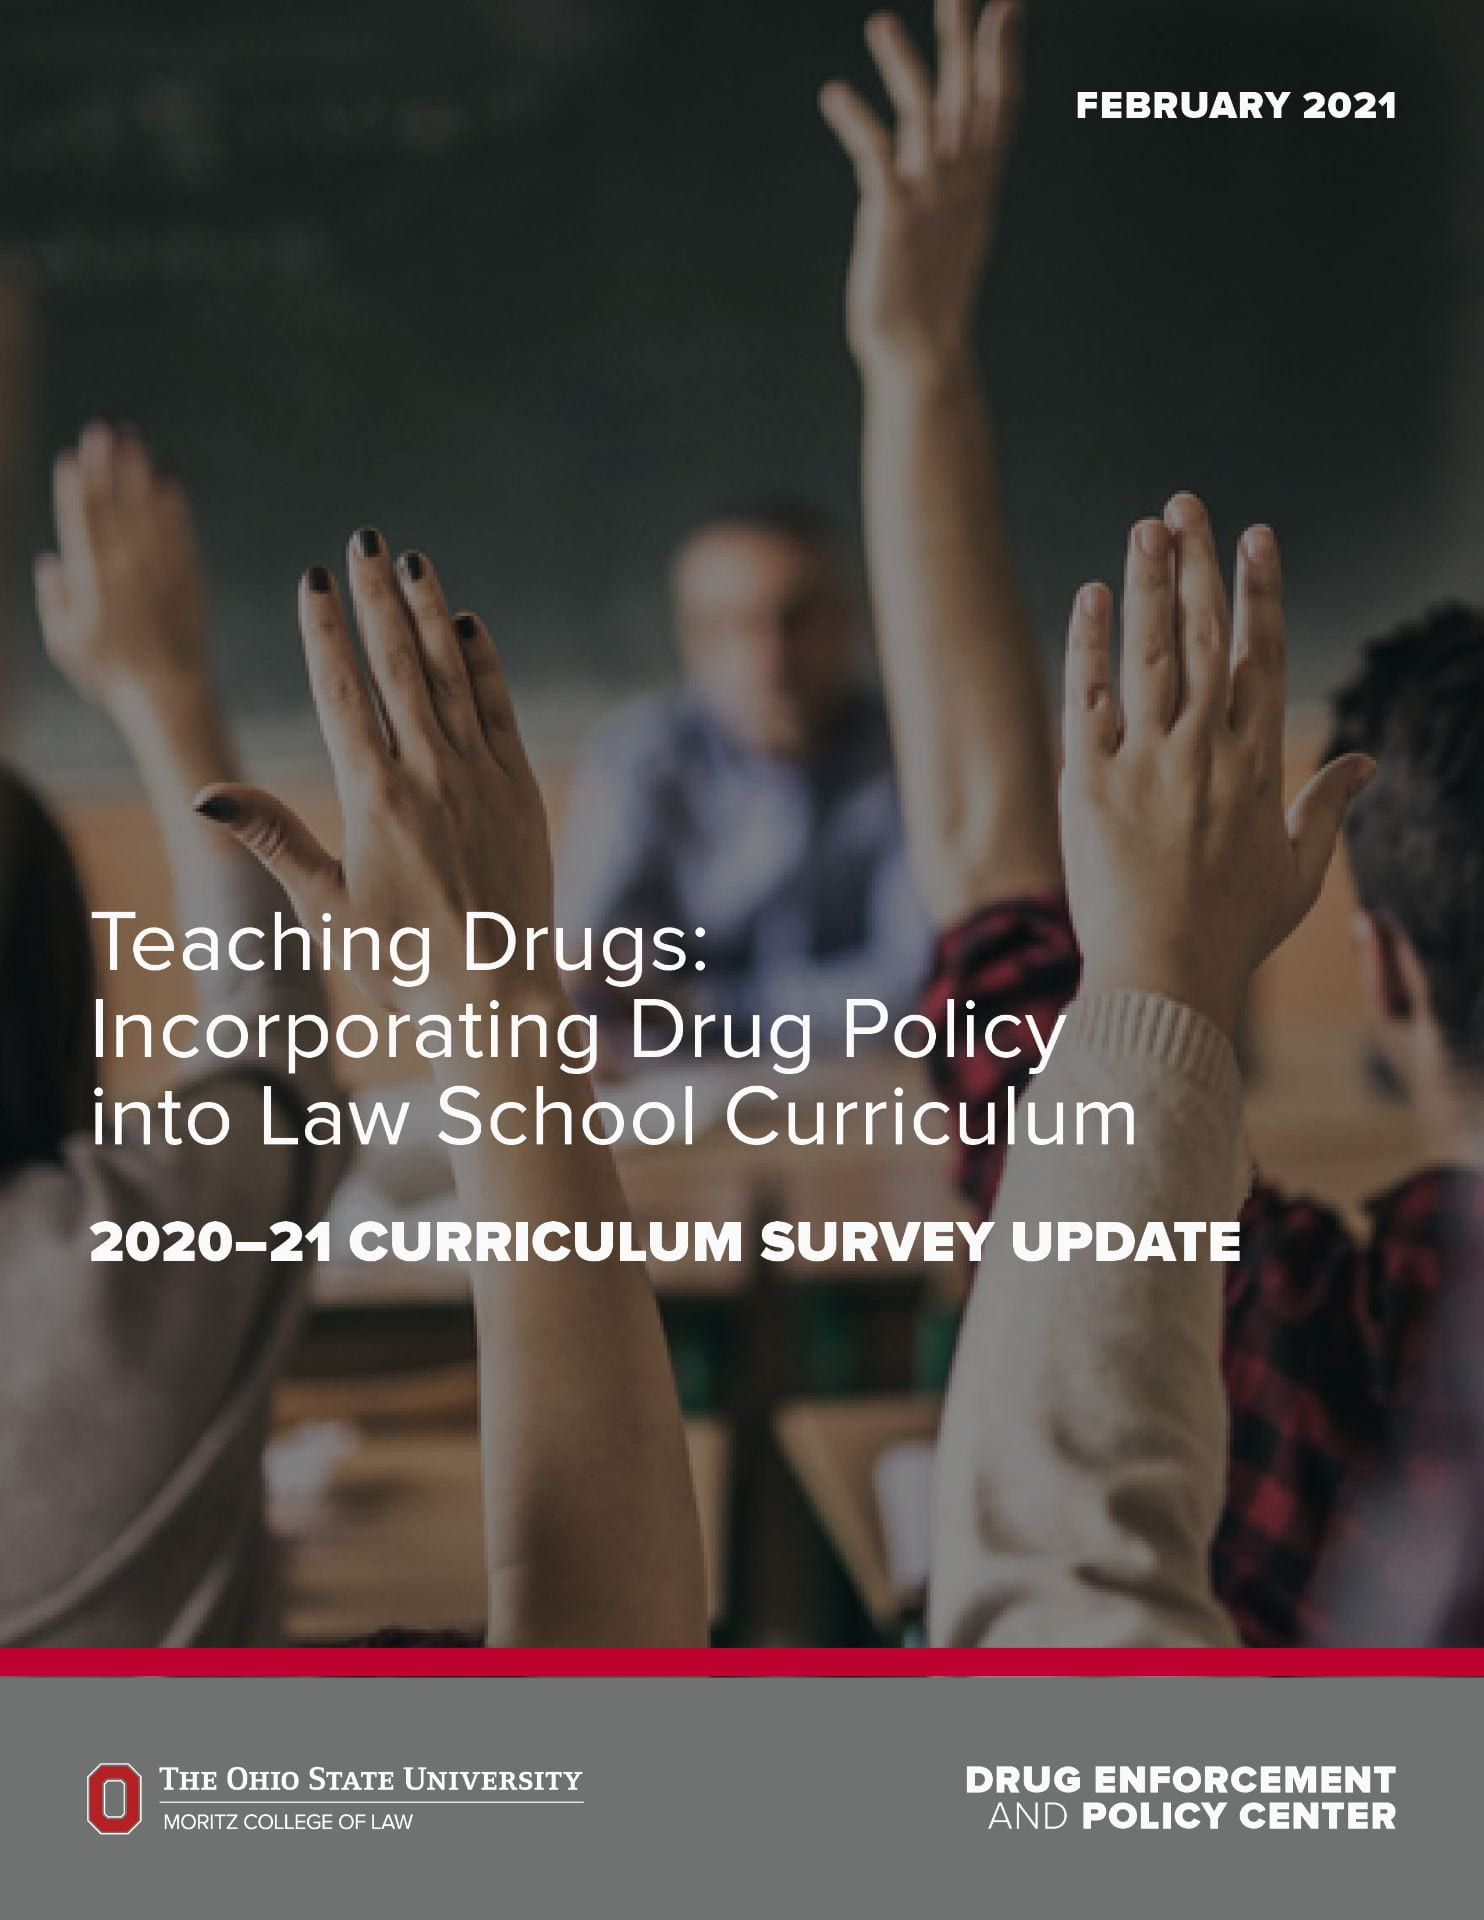 Teaching Drugs: Incorporating Drug Policy into Law School Curriculum, 2020-21 Curriculum Survey Update